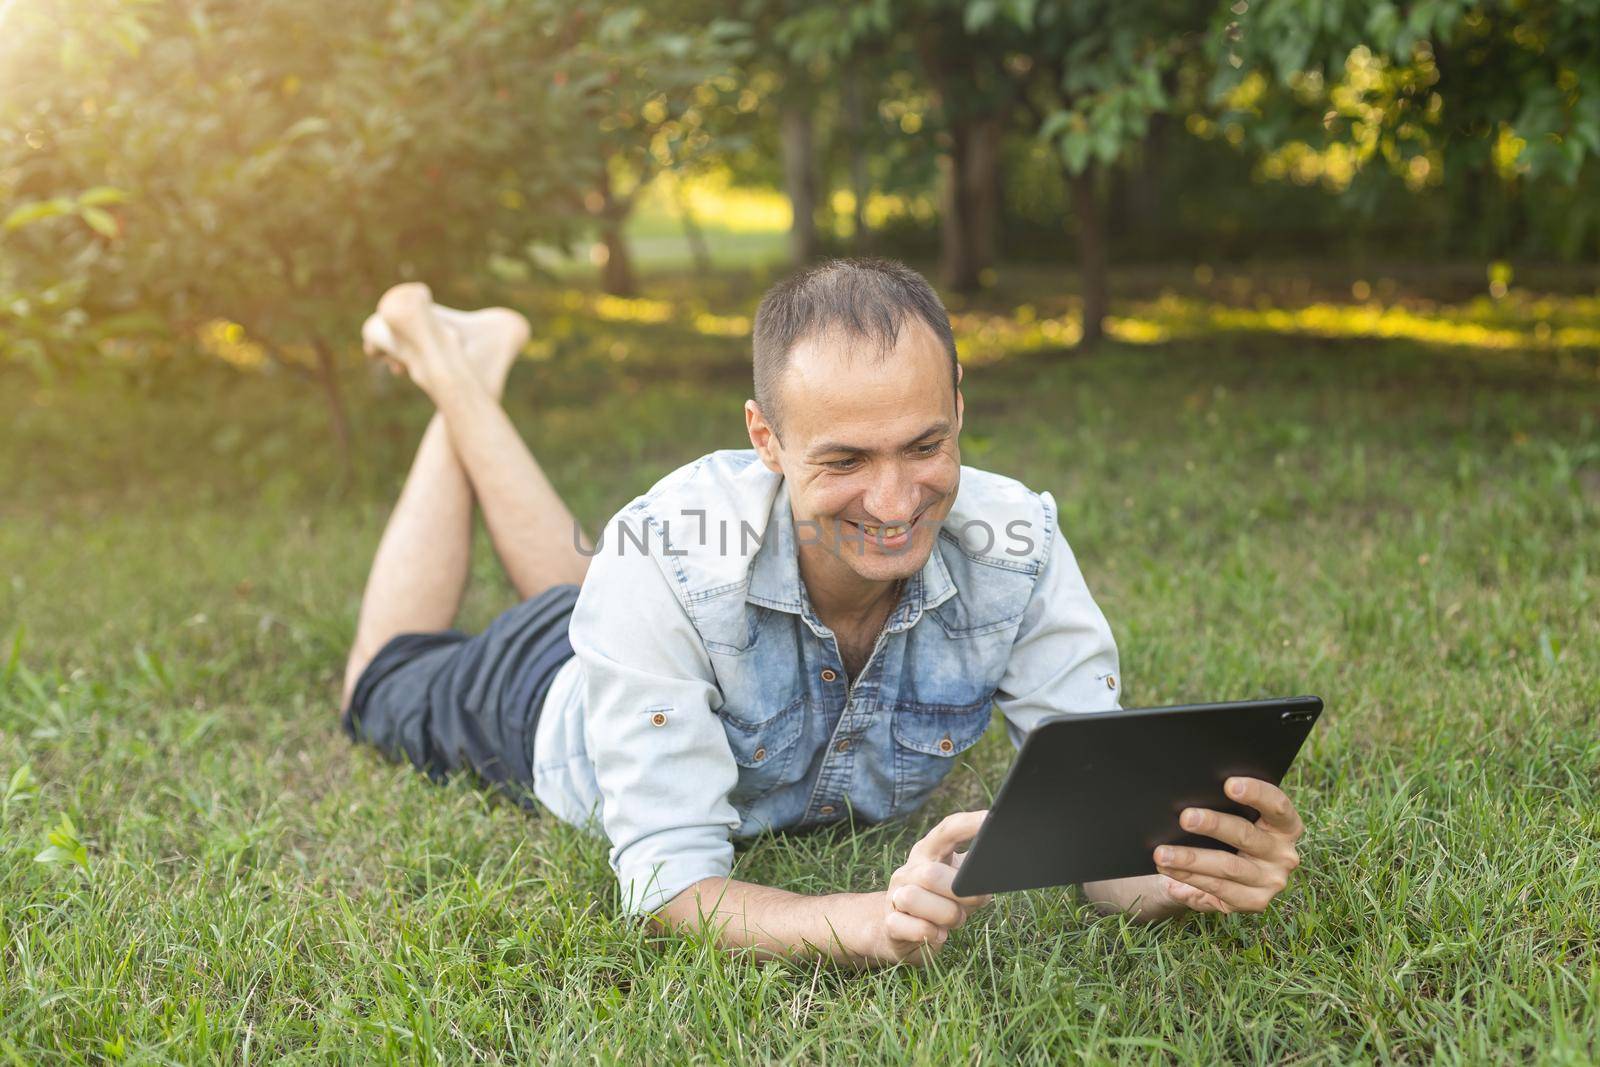 a man uses a tablet to chat in the garden by Andelov13